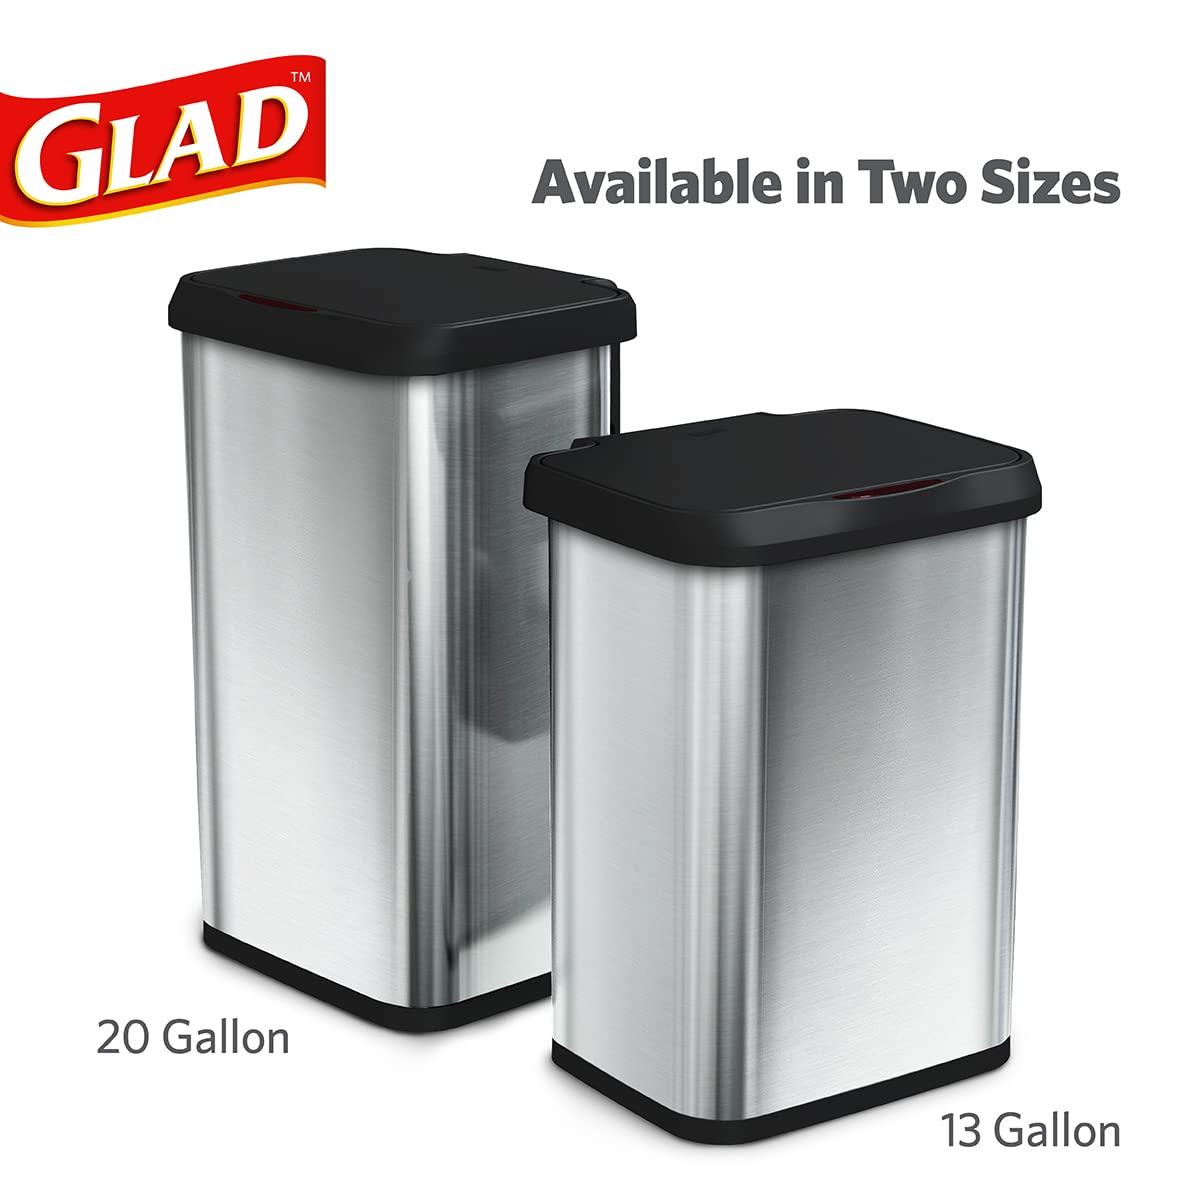 https://bigbigmart.com/wp-content/uploads/2023/05/Glad-Stainless-Steel-Trash-Can-with-Clorox-Odor-Protection-Touchless-Metal-Kitchen-Garbage-Bin-with-Soft-Close-Lid-and-Waste-Bag-Roll-Holder-20-Gallon-Motion-Sensor6.jpg